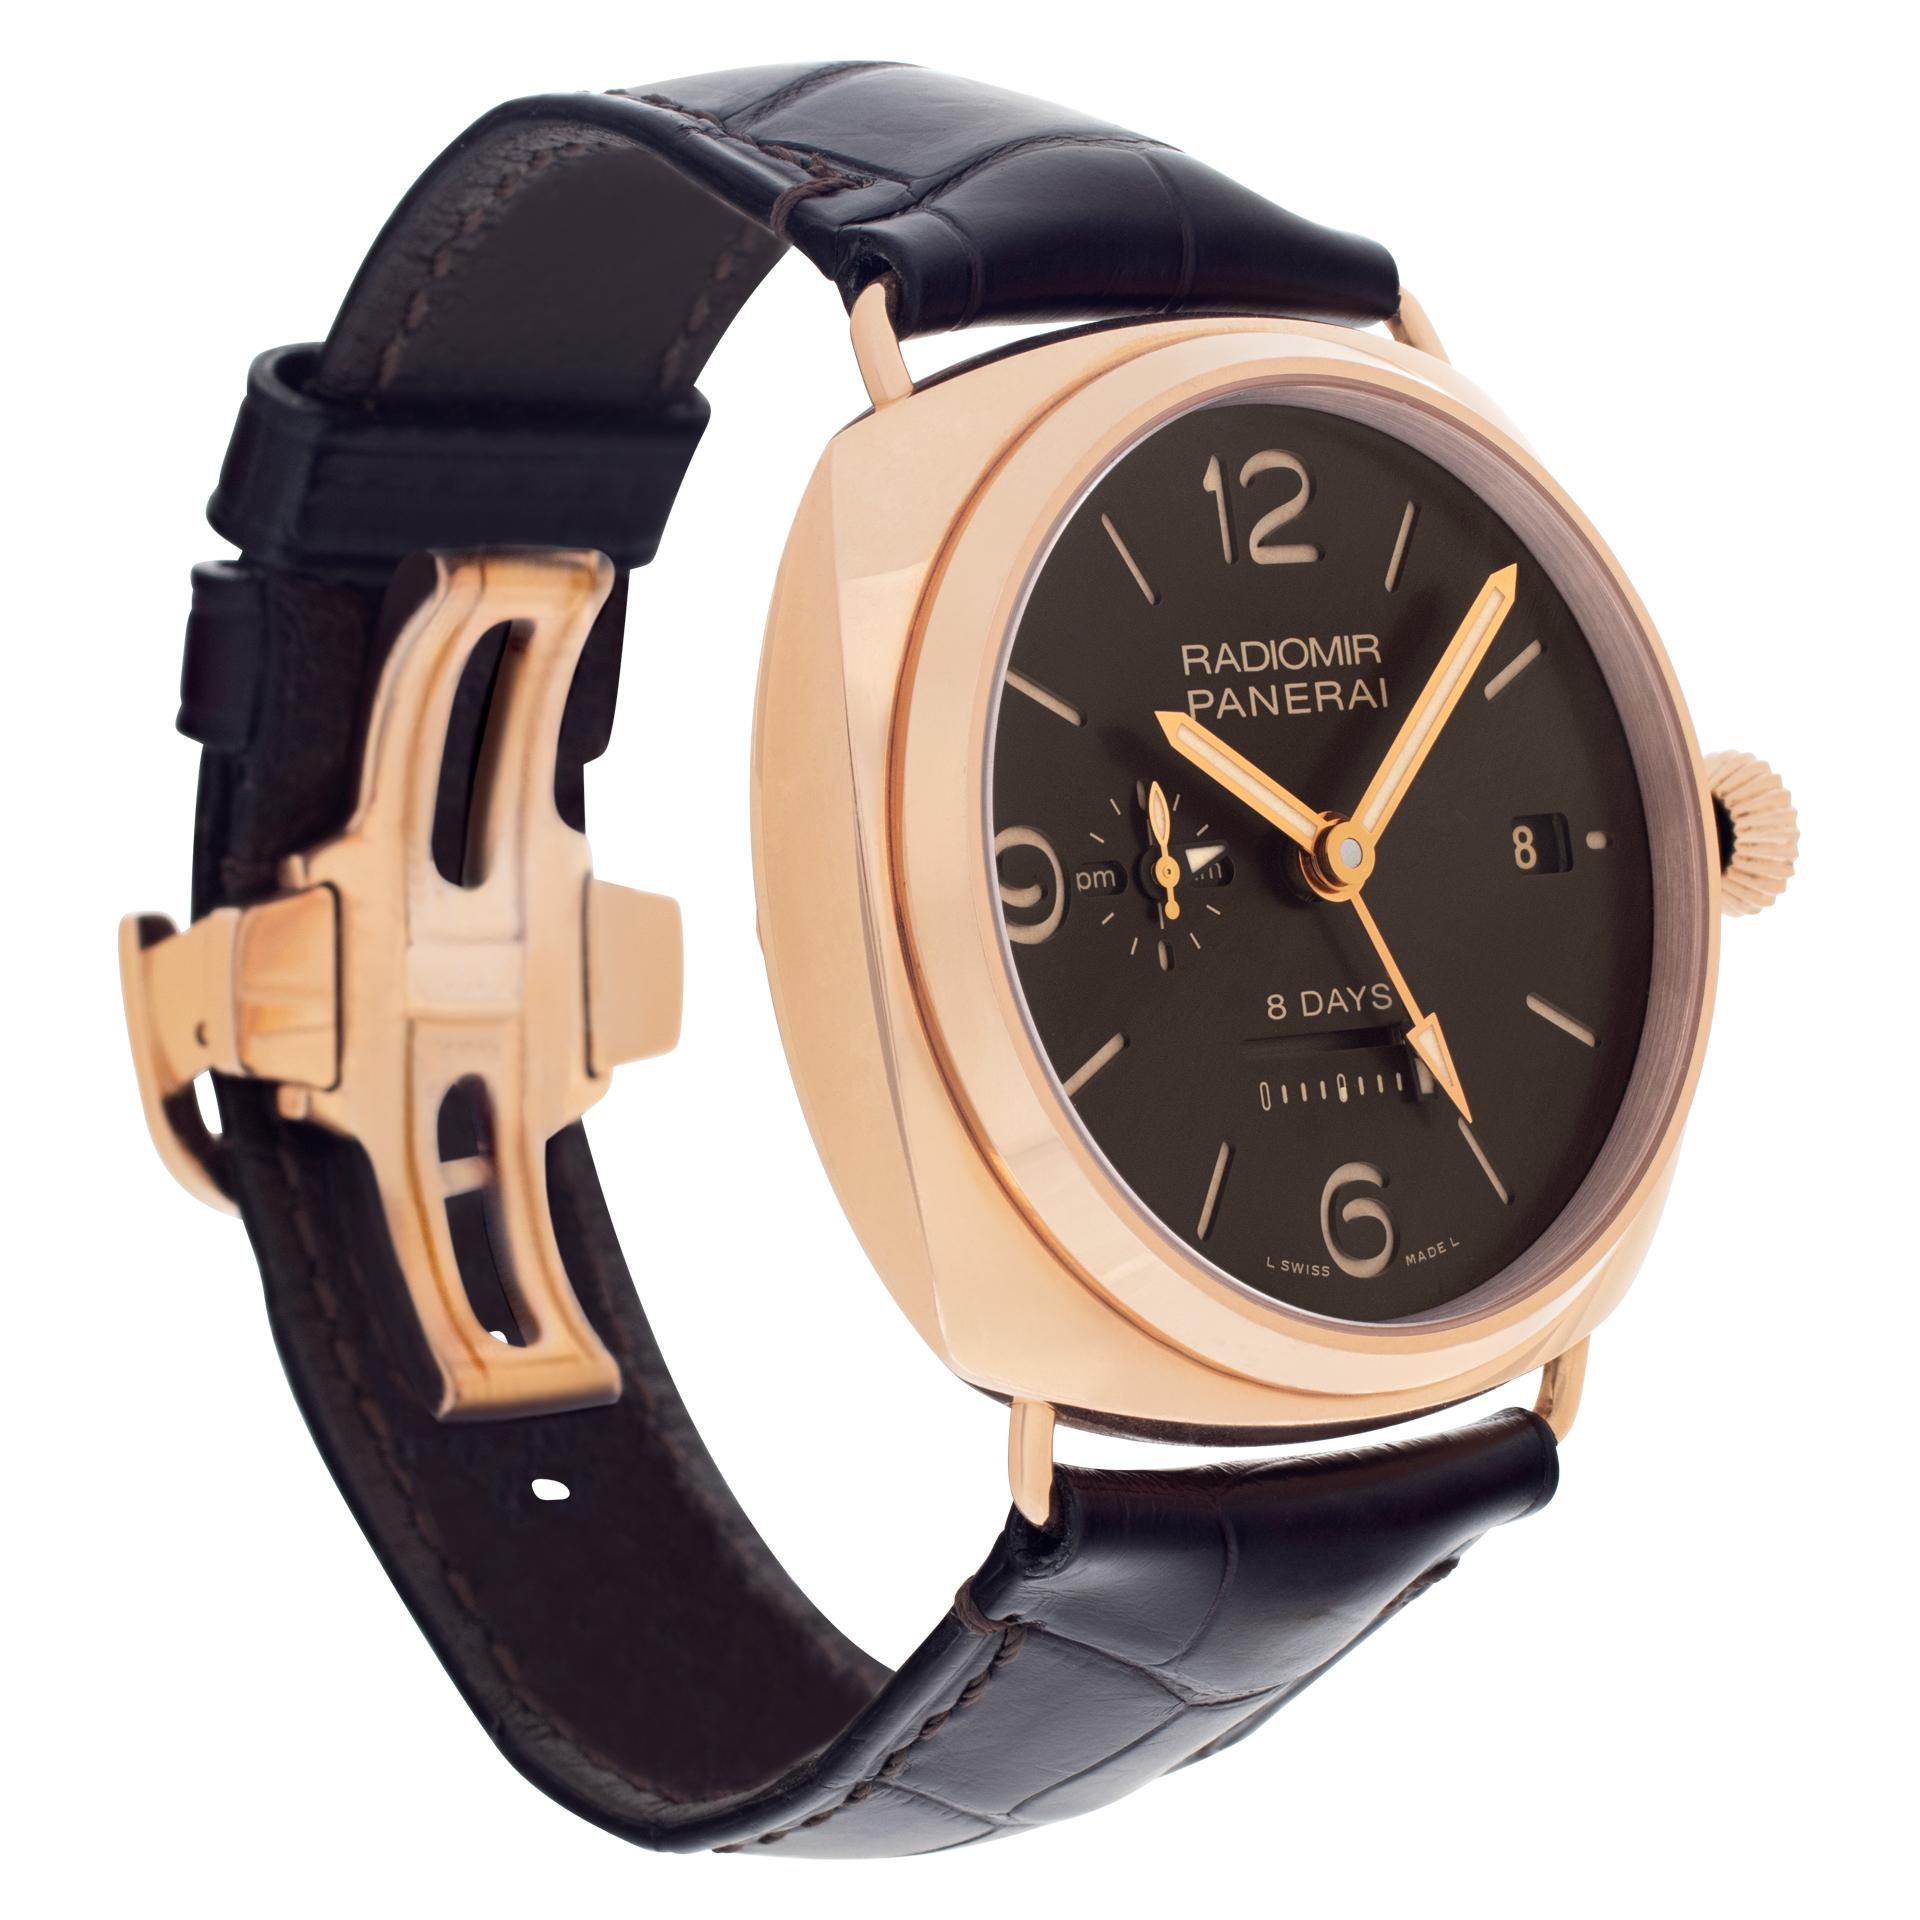 Panerai Radiomir PAM395 in rose gold 45mm Manual watch In Excellent Condition For Sale In Surfside, FL